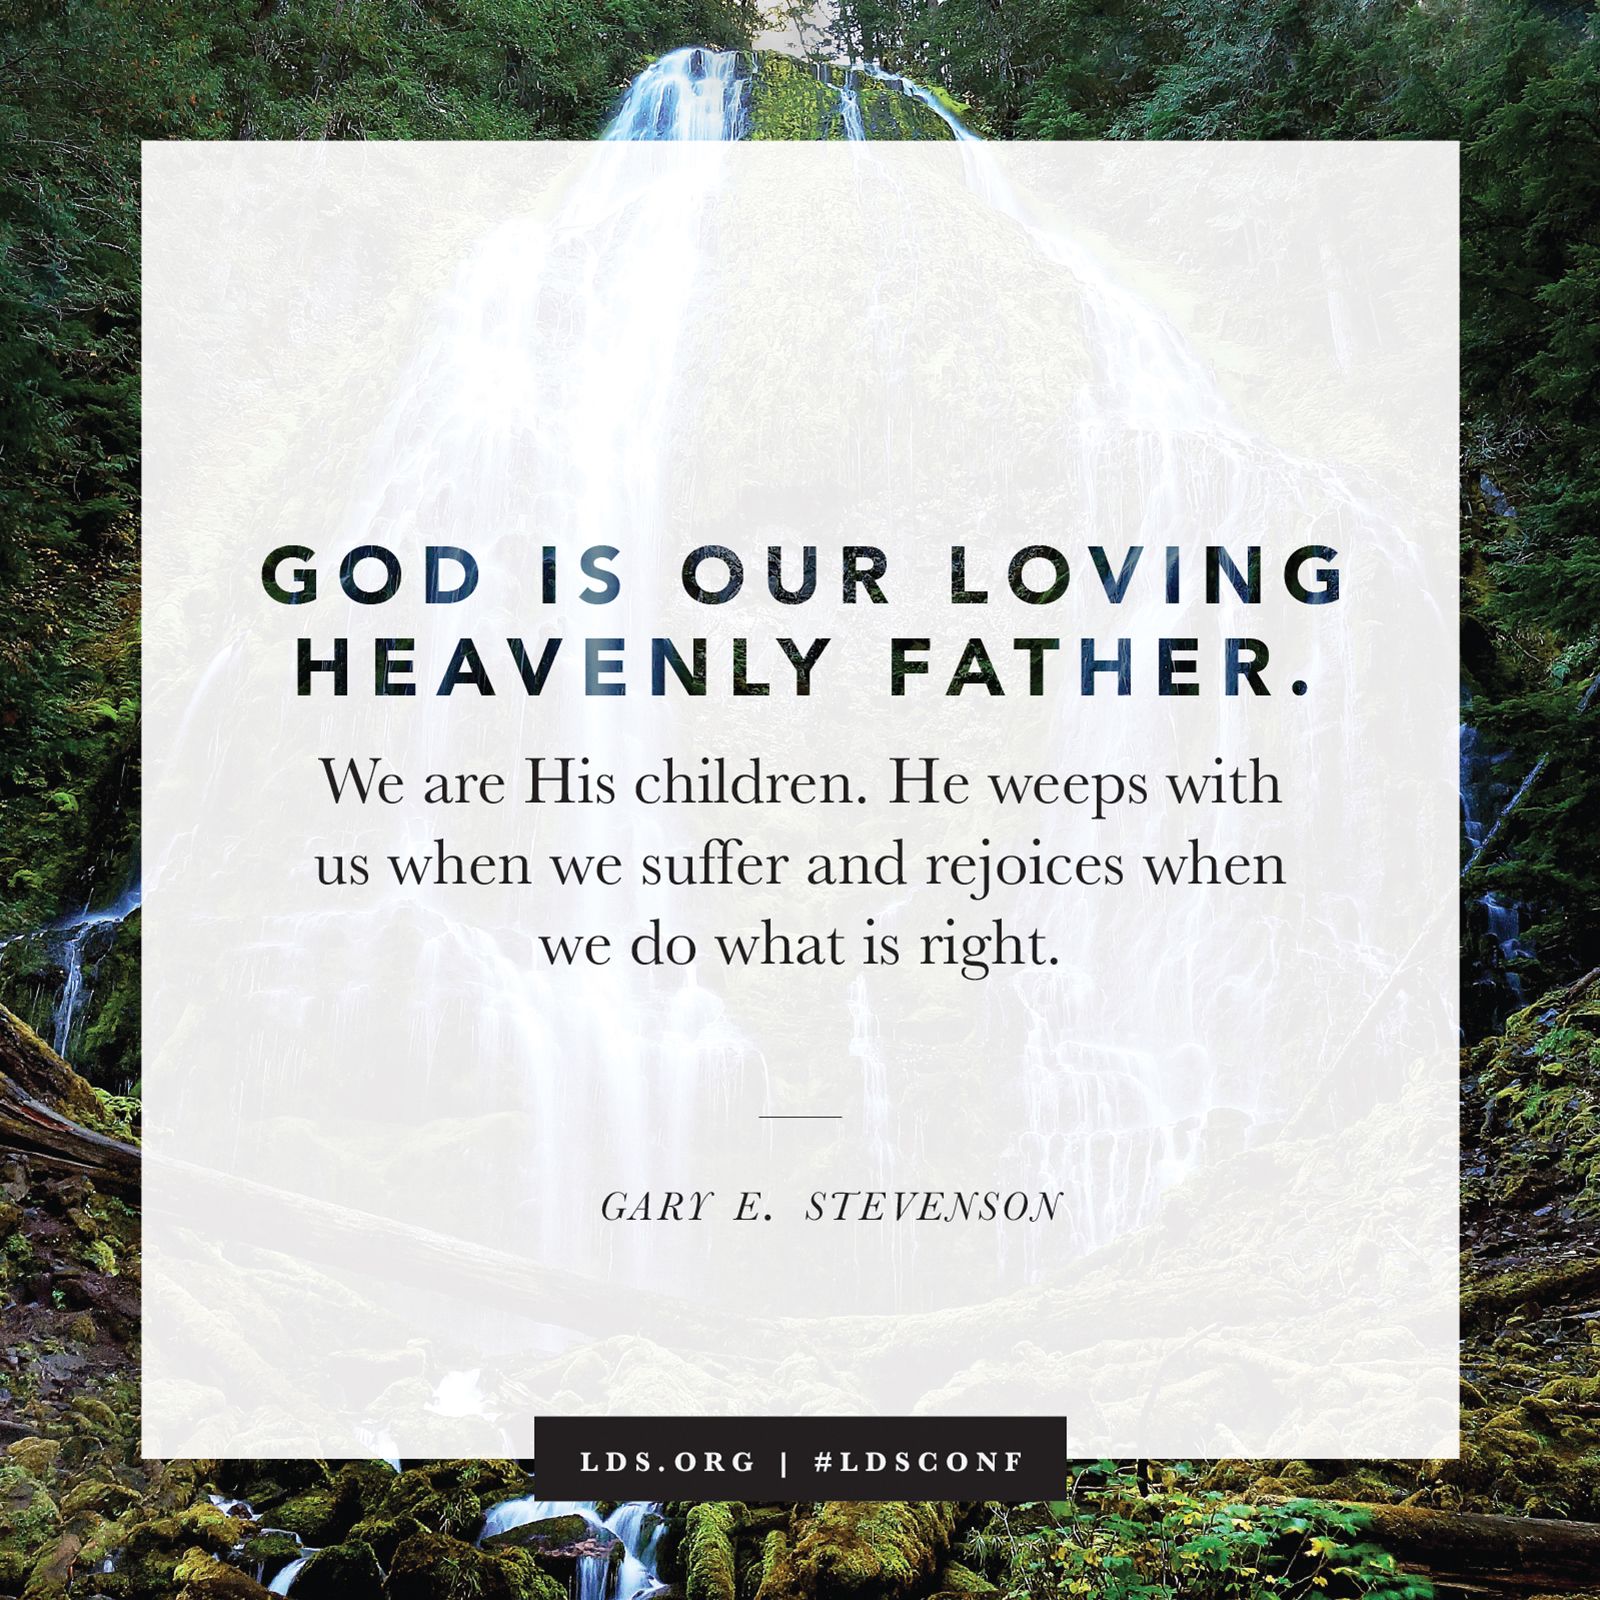 “God is our loving Heavenly Father. We are His children. He weeps with us when we suffer and rejoices when we do what is right.” —Elder Gary E. Stevenson, “Plain and Precious Truths”